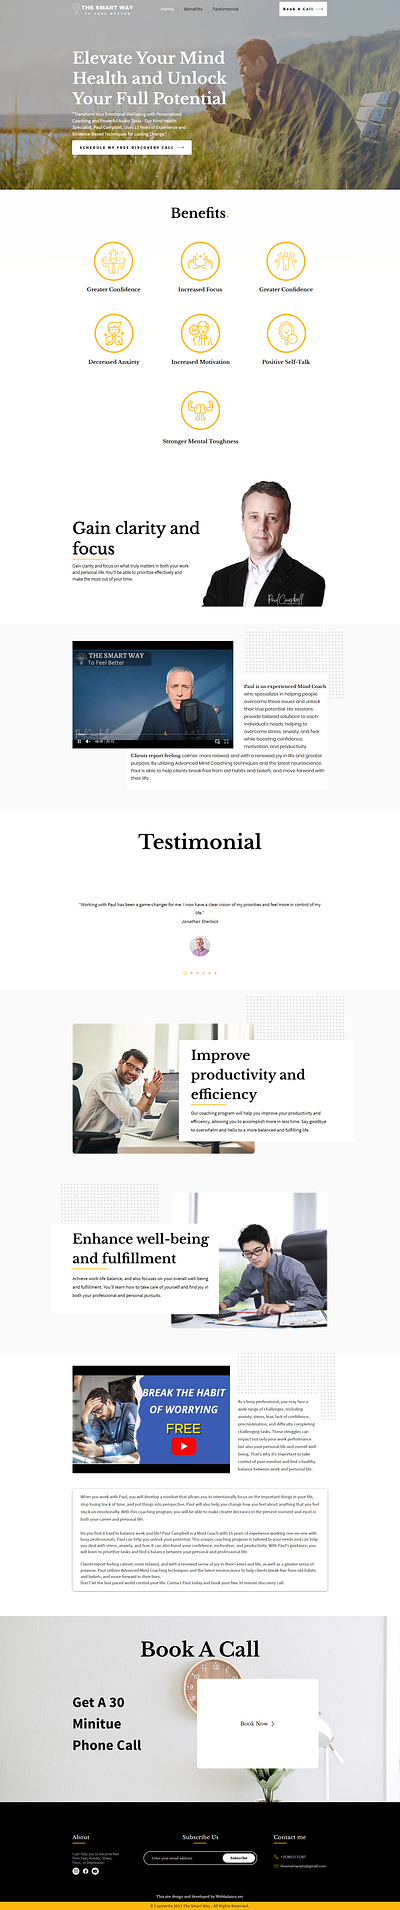 Mind Coach Website made by wix booking branding coach design health landing page mind ui user experience user interface ux website wix